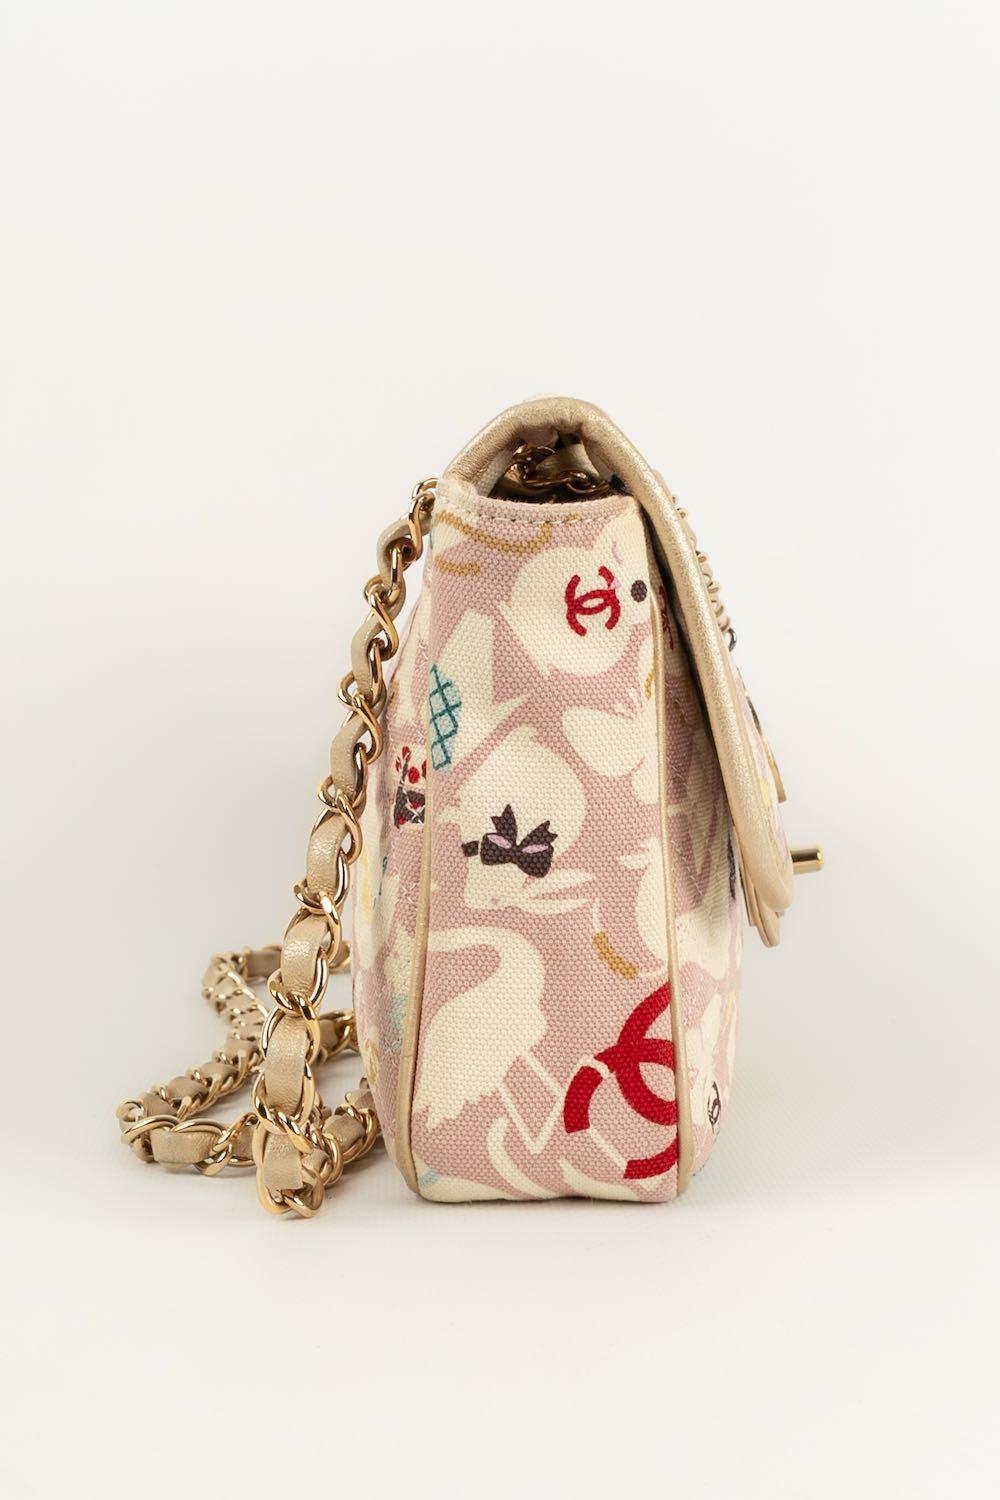 Chanel - (Made in Italy) Cotton bag printed with animals in shades of pink and white. Champagne metal attributes, leather finishes. Serial number present. Collection 2007. 
To note, the canvas is a little term and the metal parts are